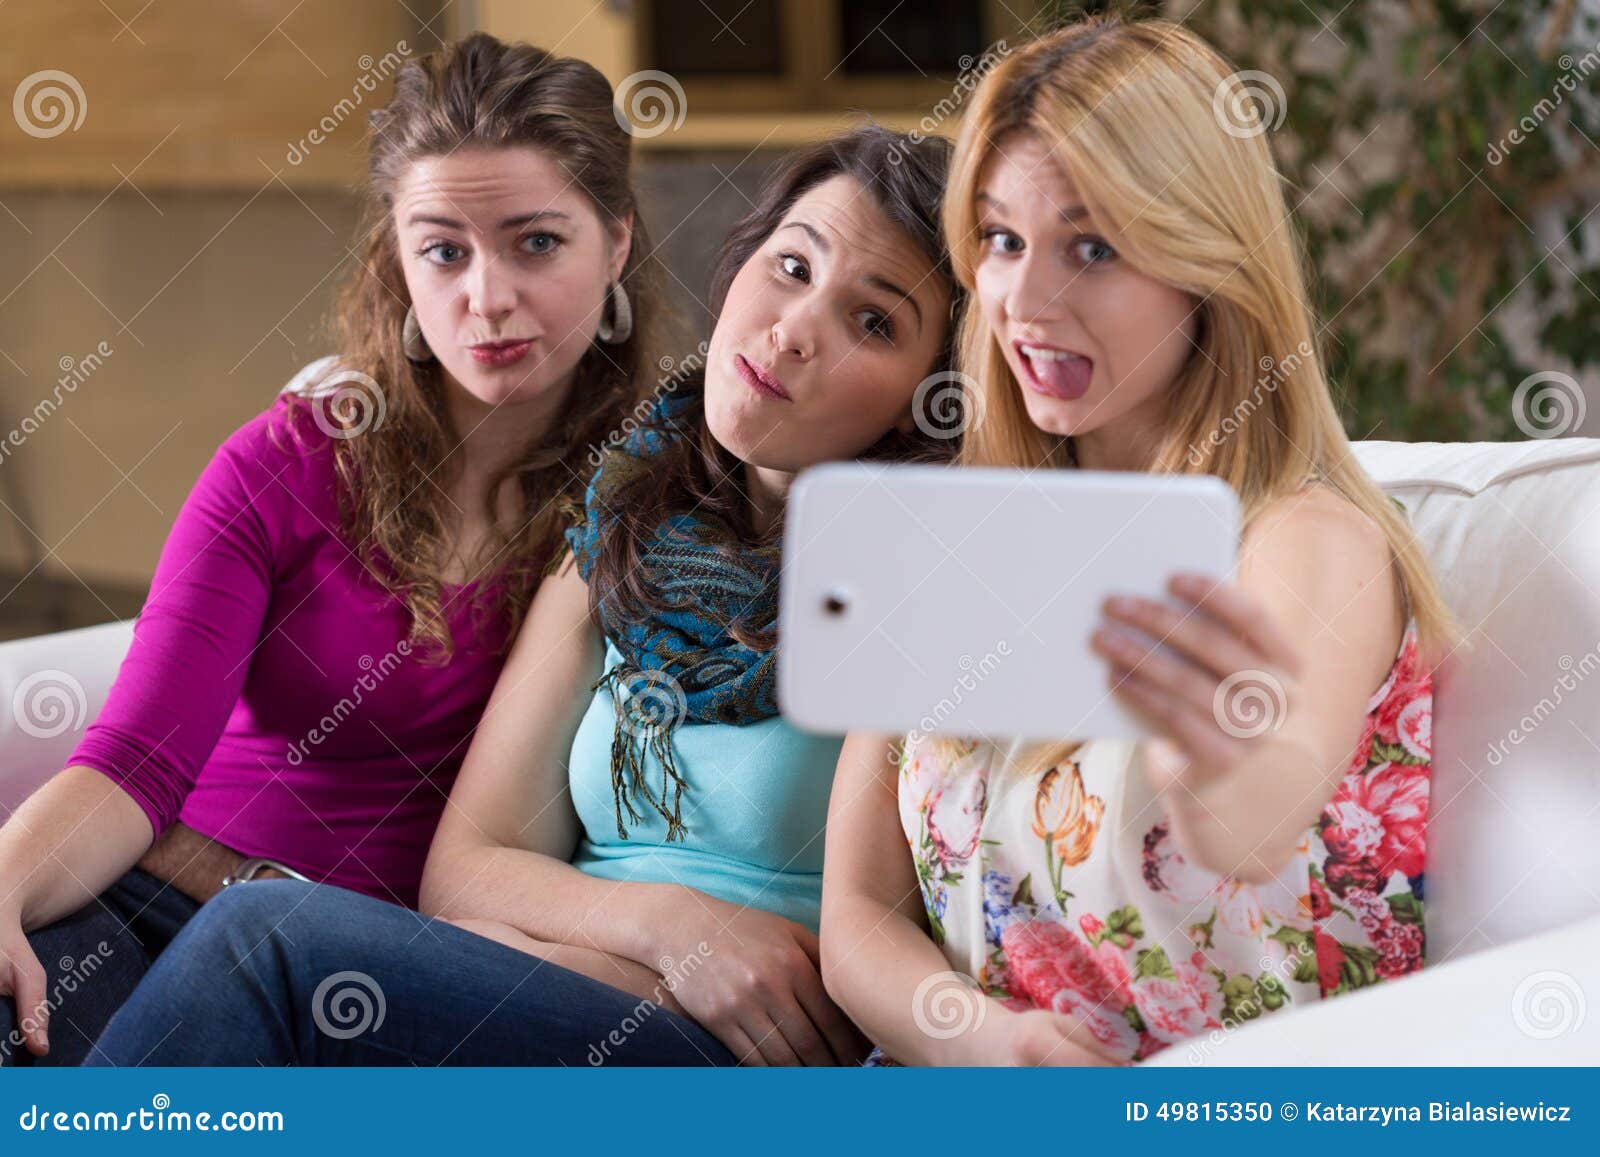 Funny faces stock photo. Image of happiness, people, mobile - 49815350